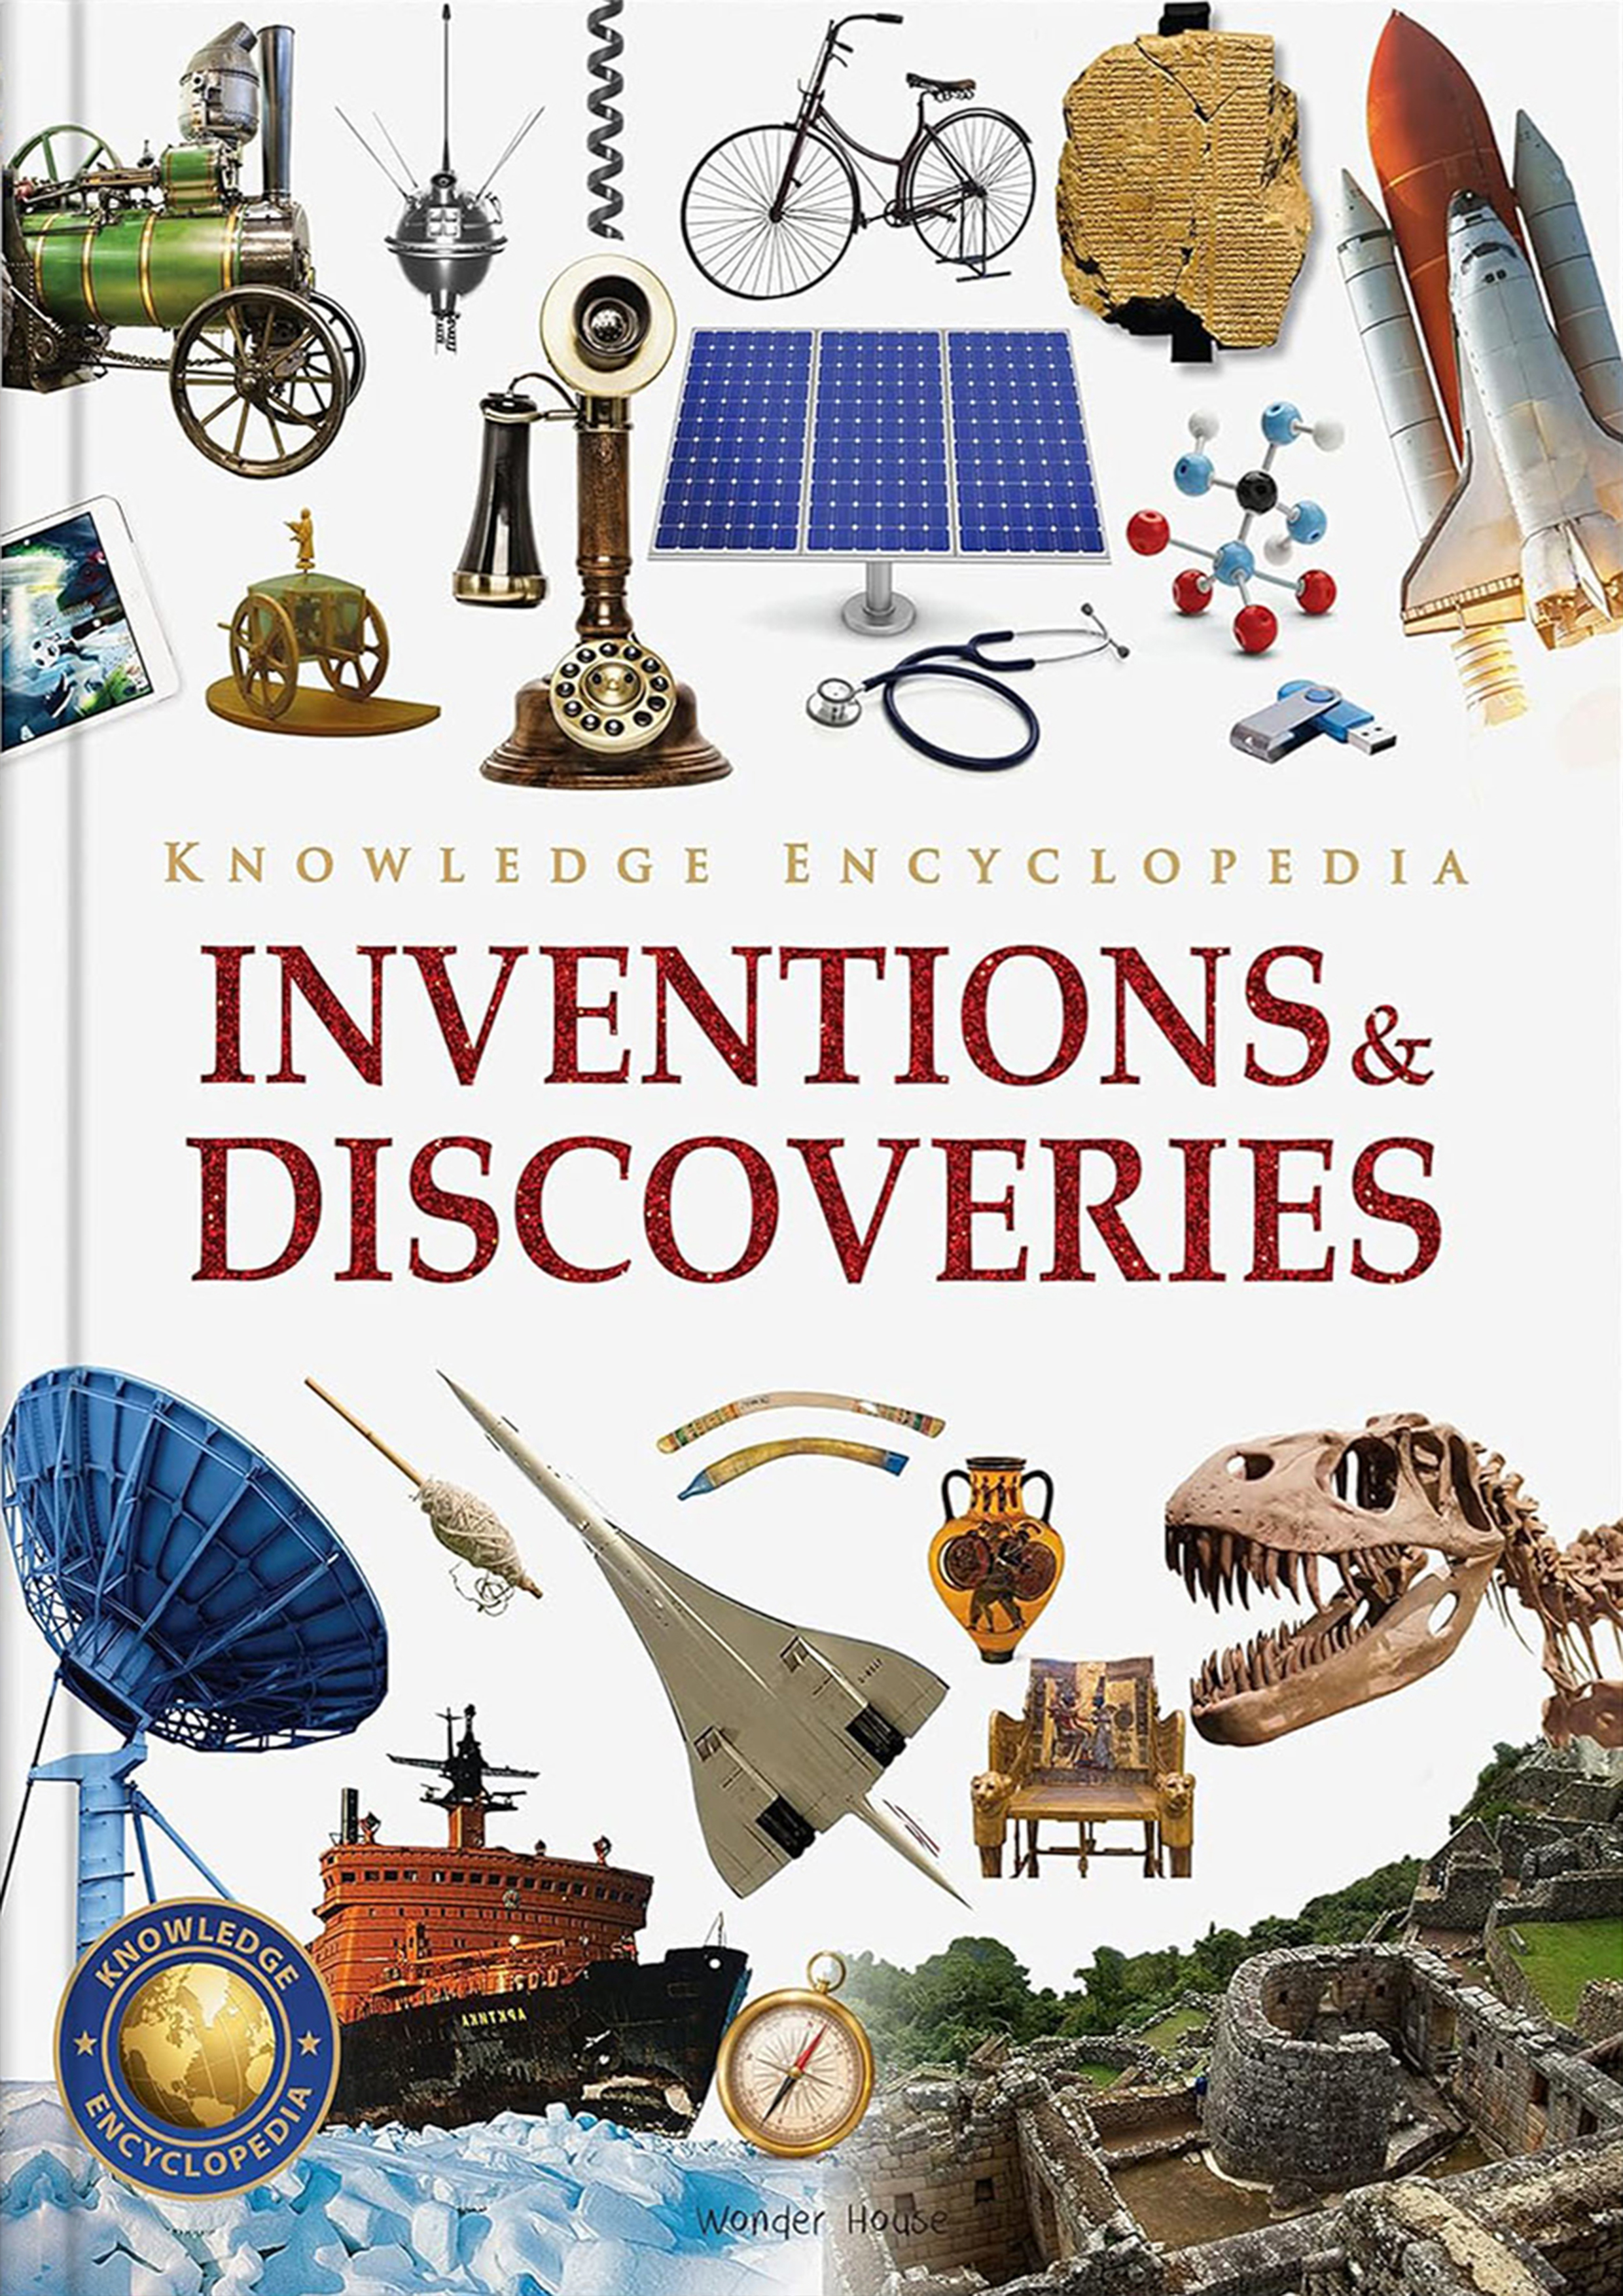 Knowledge Encyclopedia Inventions & Discoveries (হার্ডকভার)